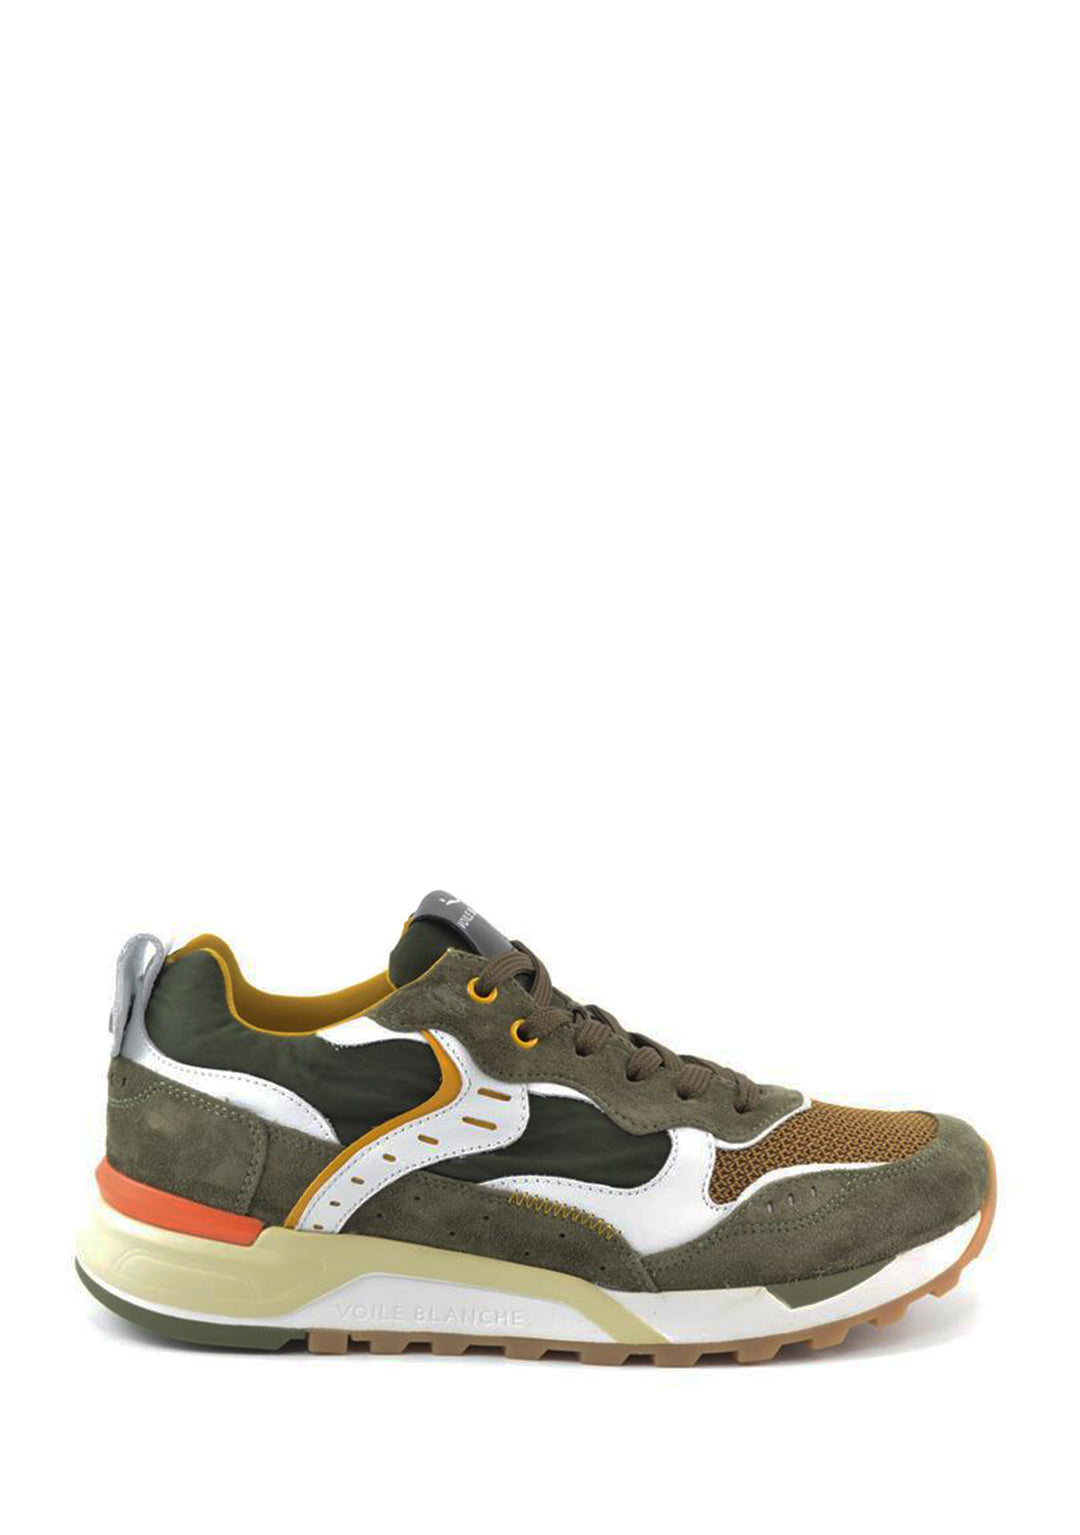 SNEAKERS UOMO Army Green/white Voile Blanche